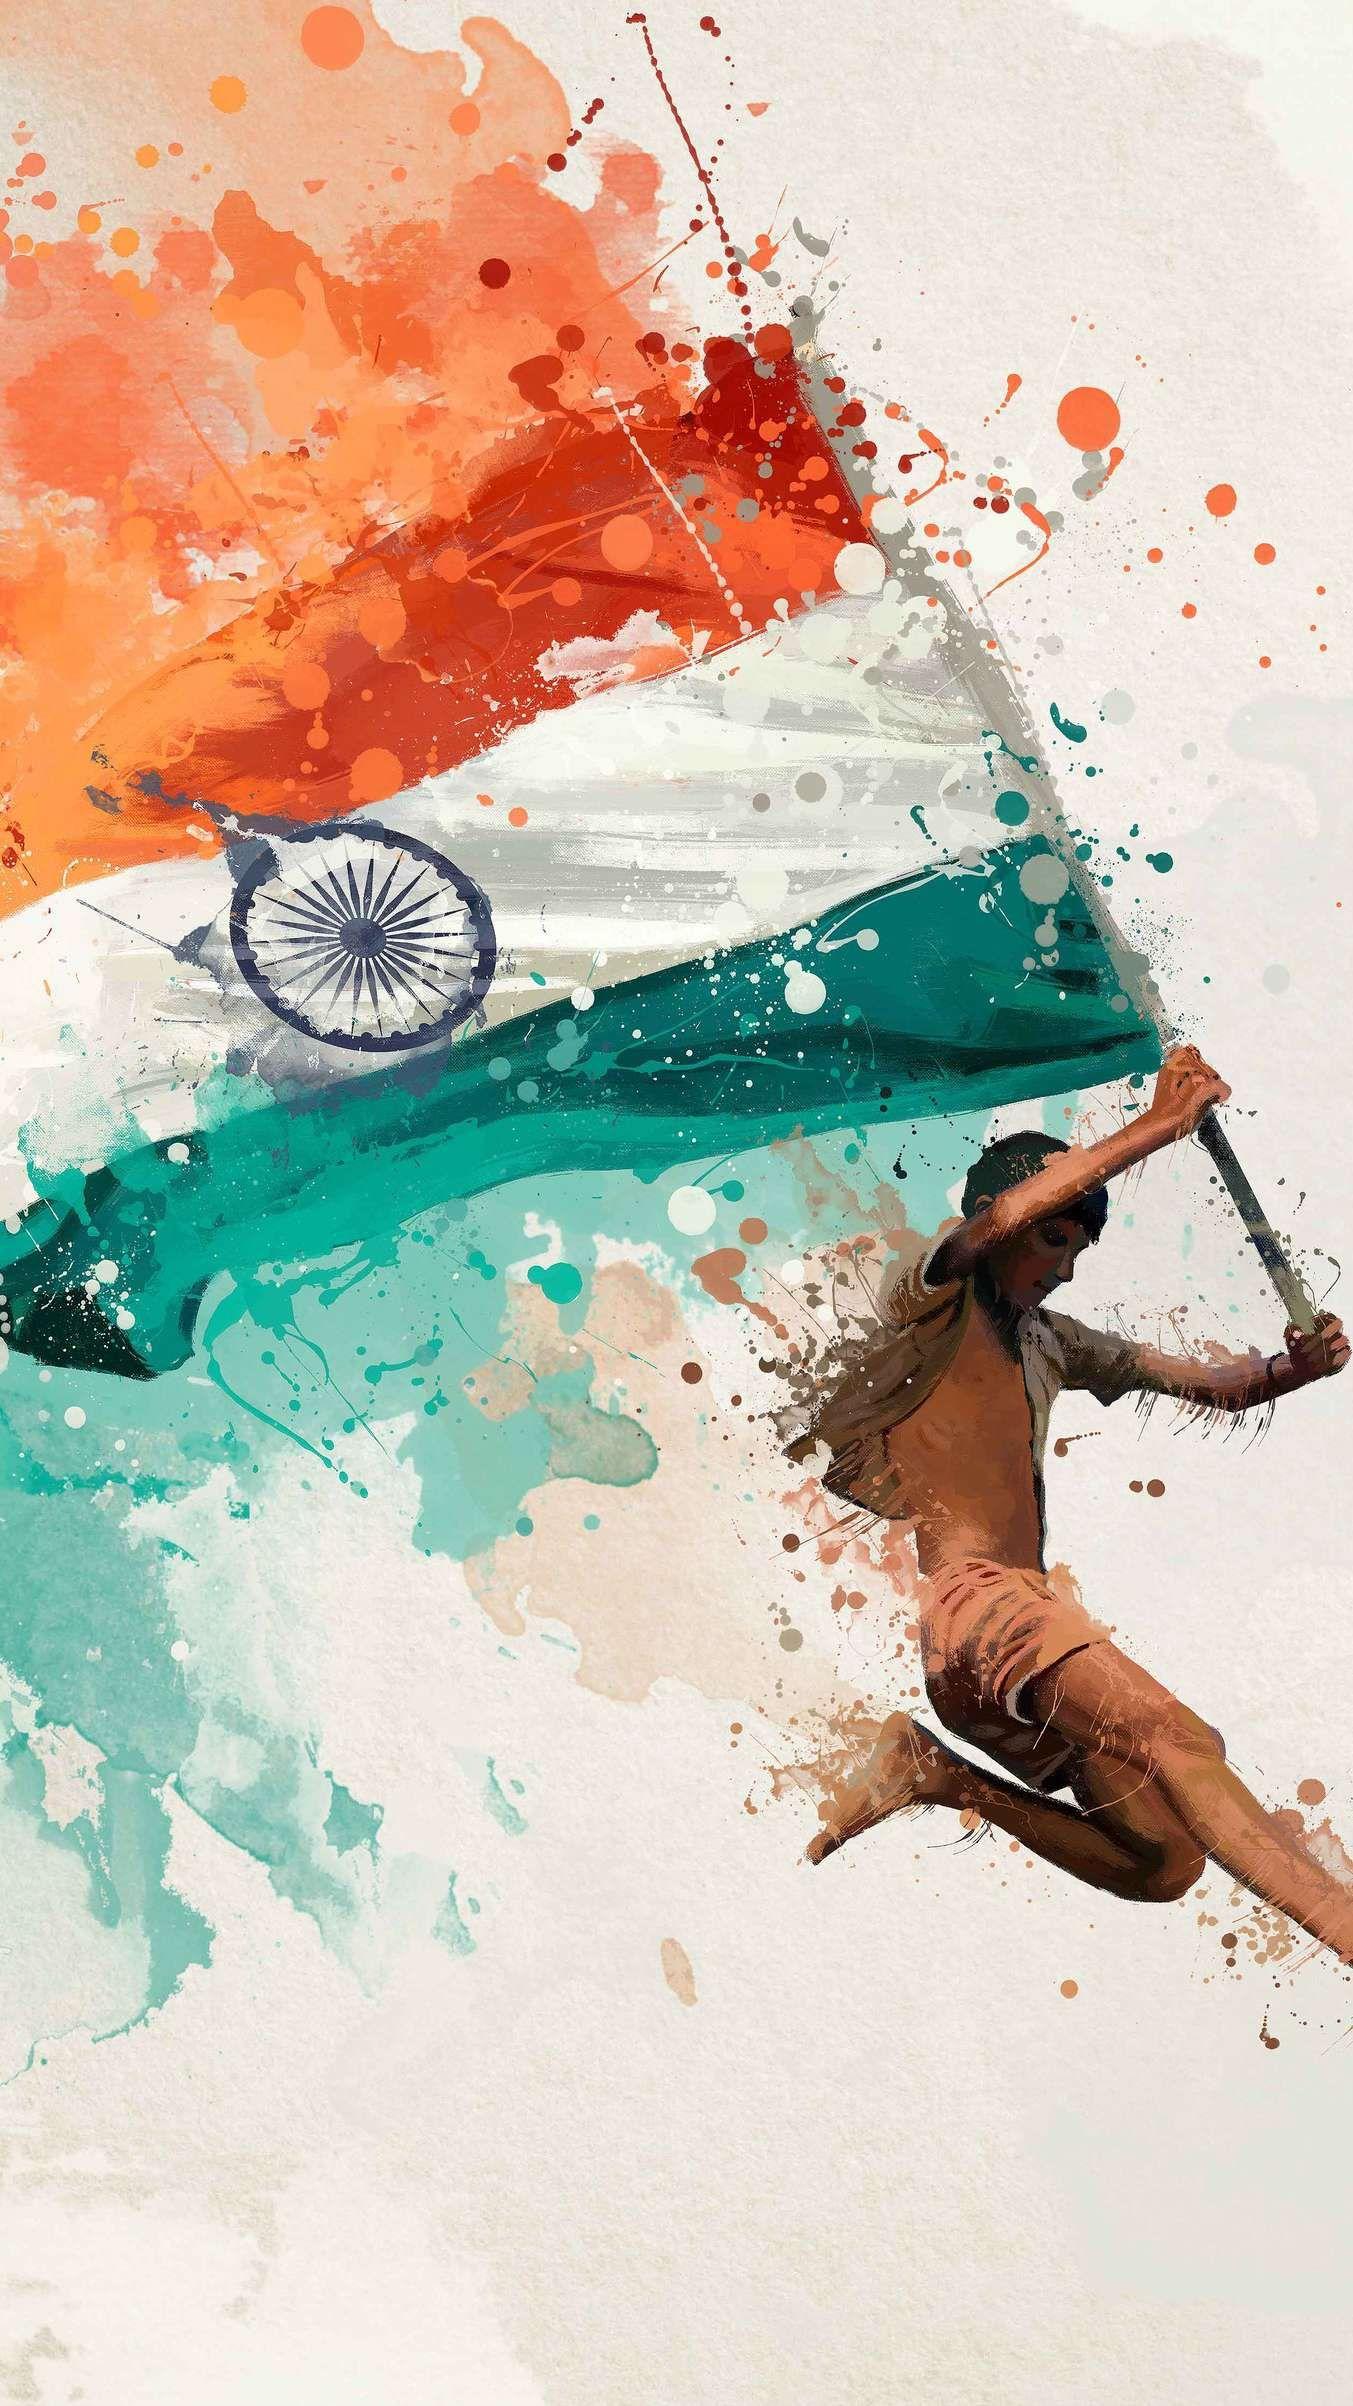 Independence day Indian Flag iPhone Wallpaper. Indian flag wallpaper, India flag, Indian flag